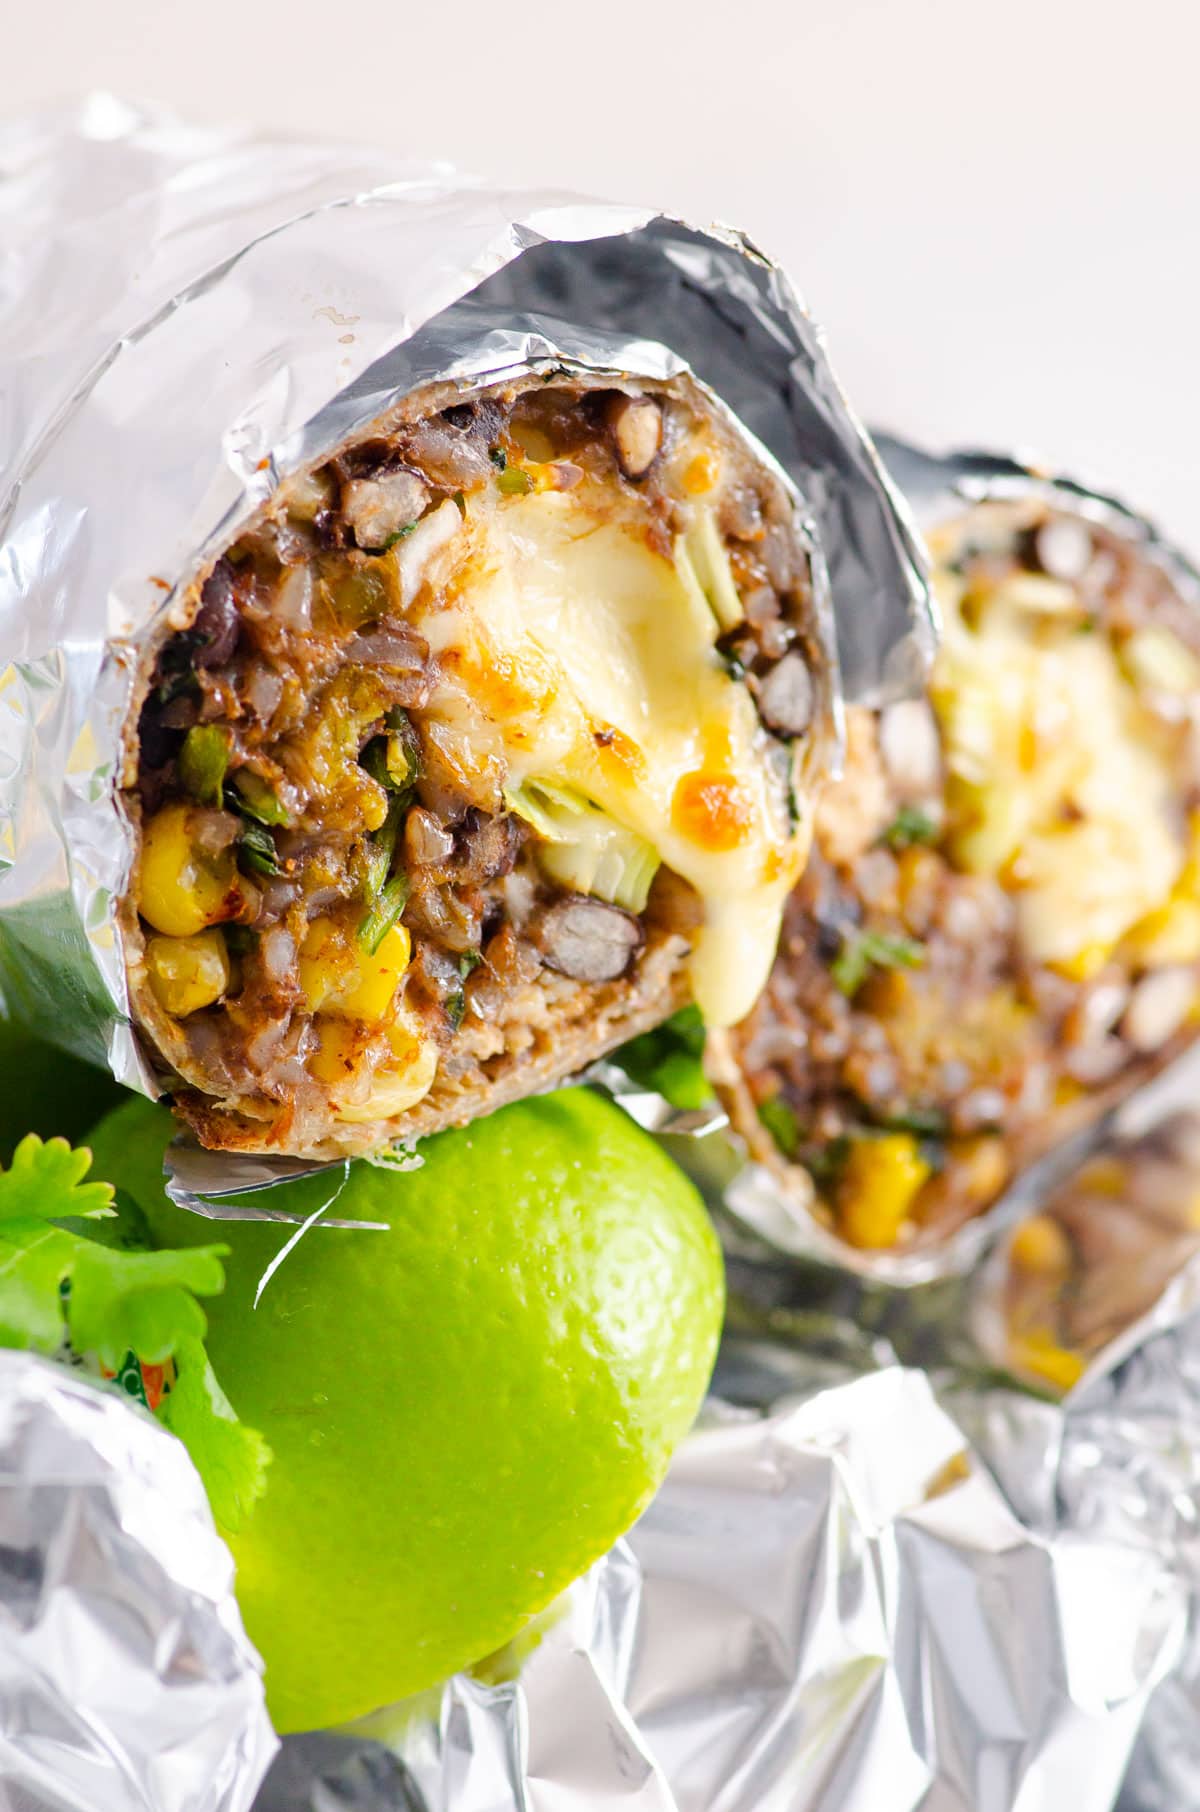 Chicken burritos wrapped in aluminum foil showing texture inside with melted cheese.